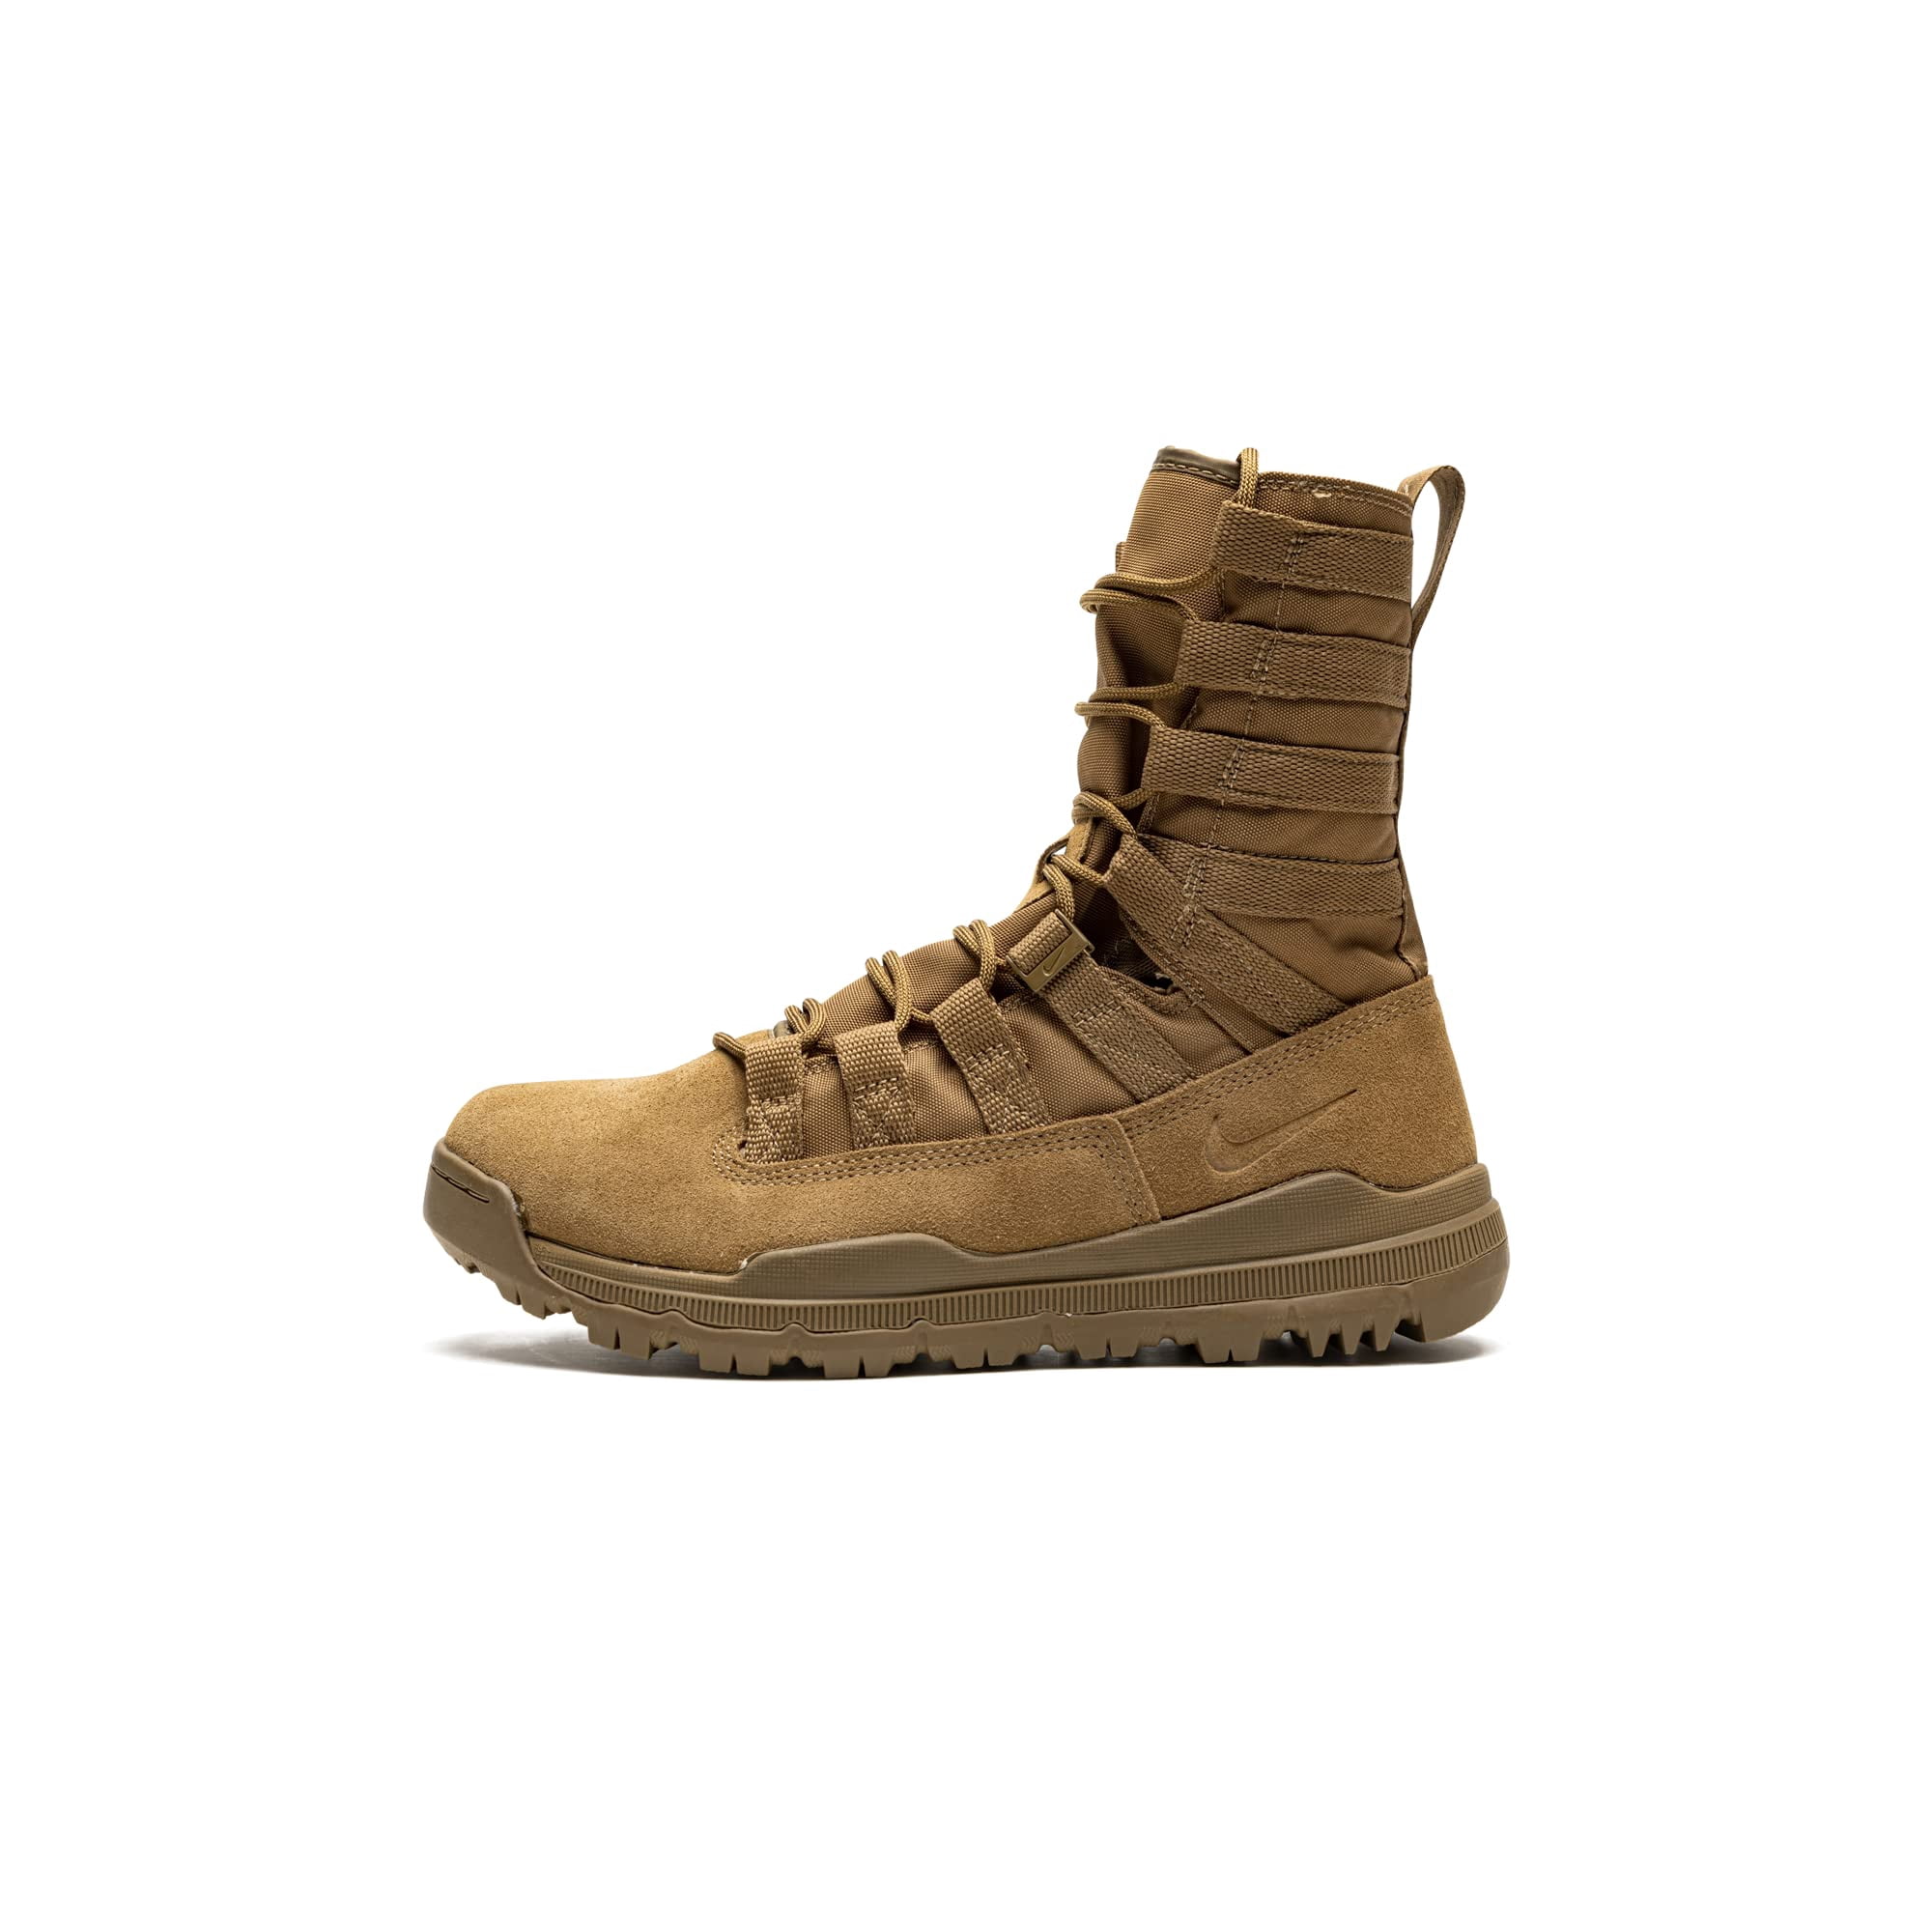 Nike SFB Gen 8" Leather 922471-900 Coyote Second Generation Men's Boots (11.5 D US) Canada